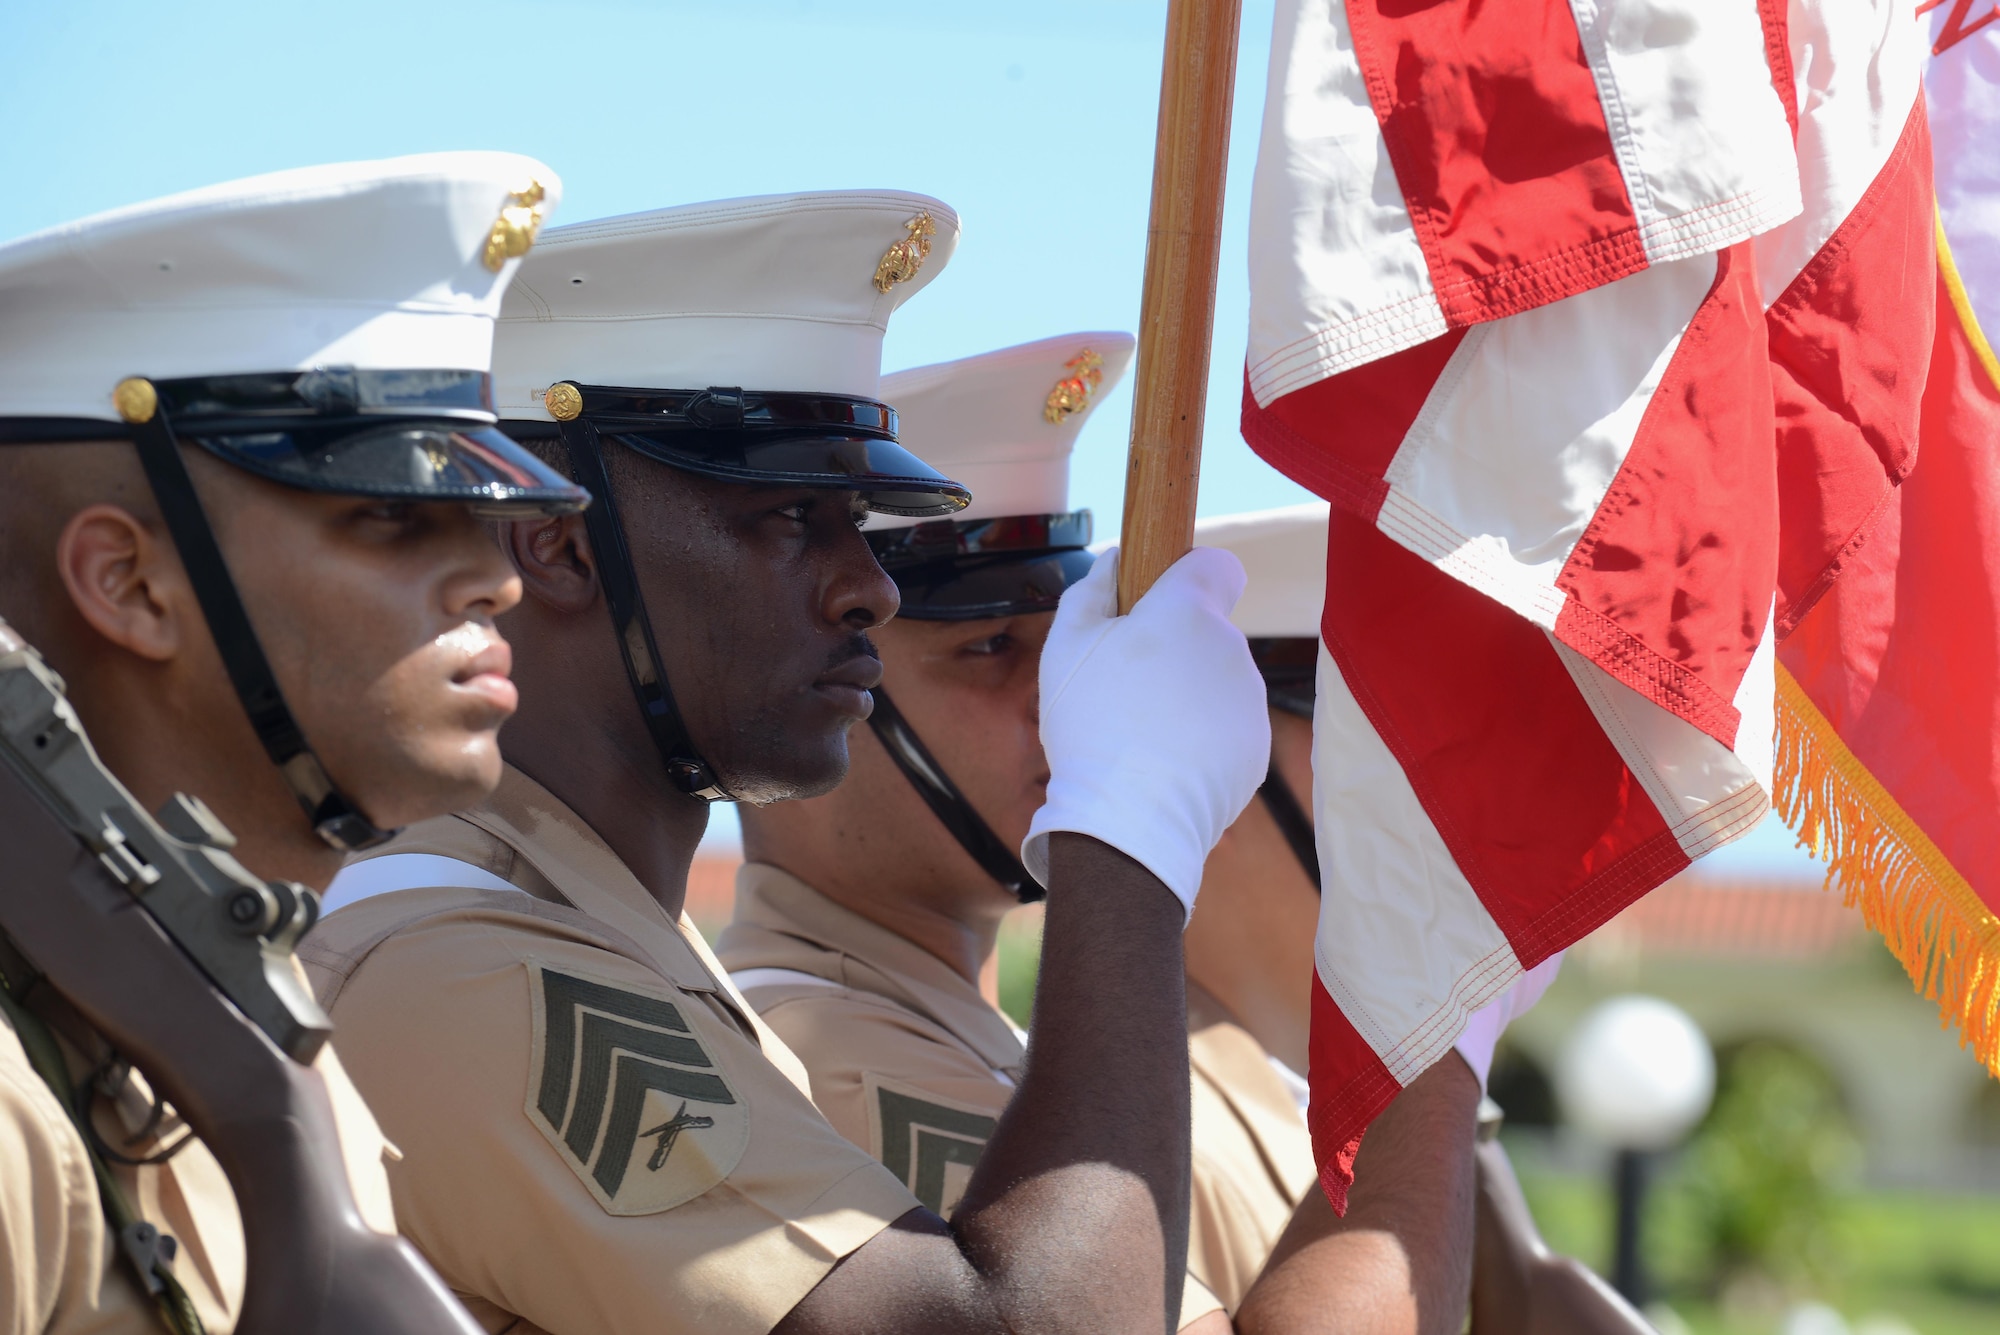 U.S. Marines assigned to 3rd Marine Division, III Marine Expeditionary Force color guard, march during the 72nd Guam Liberation Day parade July 21, 2016, in Hagåtña, Guam. Liberation Day is celebrated every year on July 21 to mark the day Guam was liberated from Japanese occupation during World War II, to remember the suffering and to honor the sacrifices made by all. (U.S. Air Force photo by Airman 1st Class Arielle Vasquez/Released)